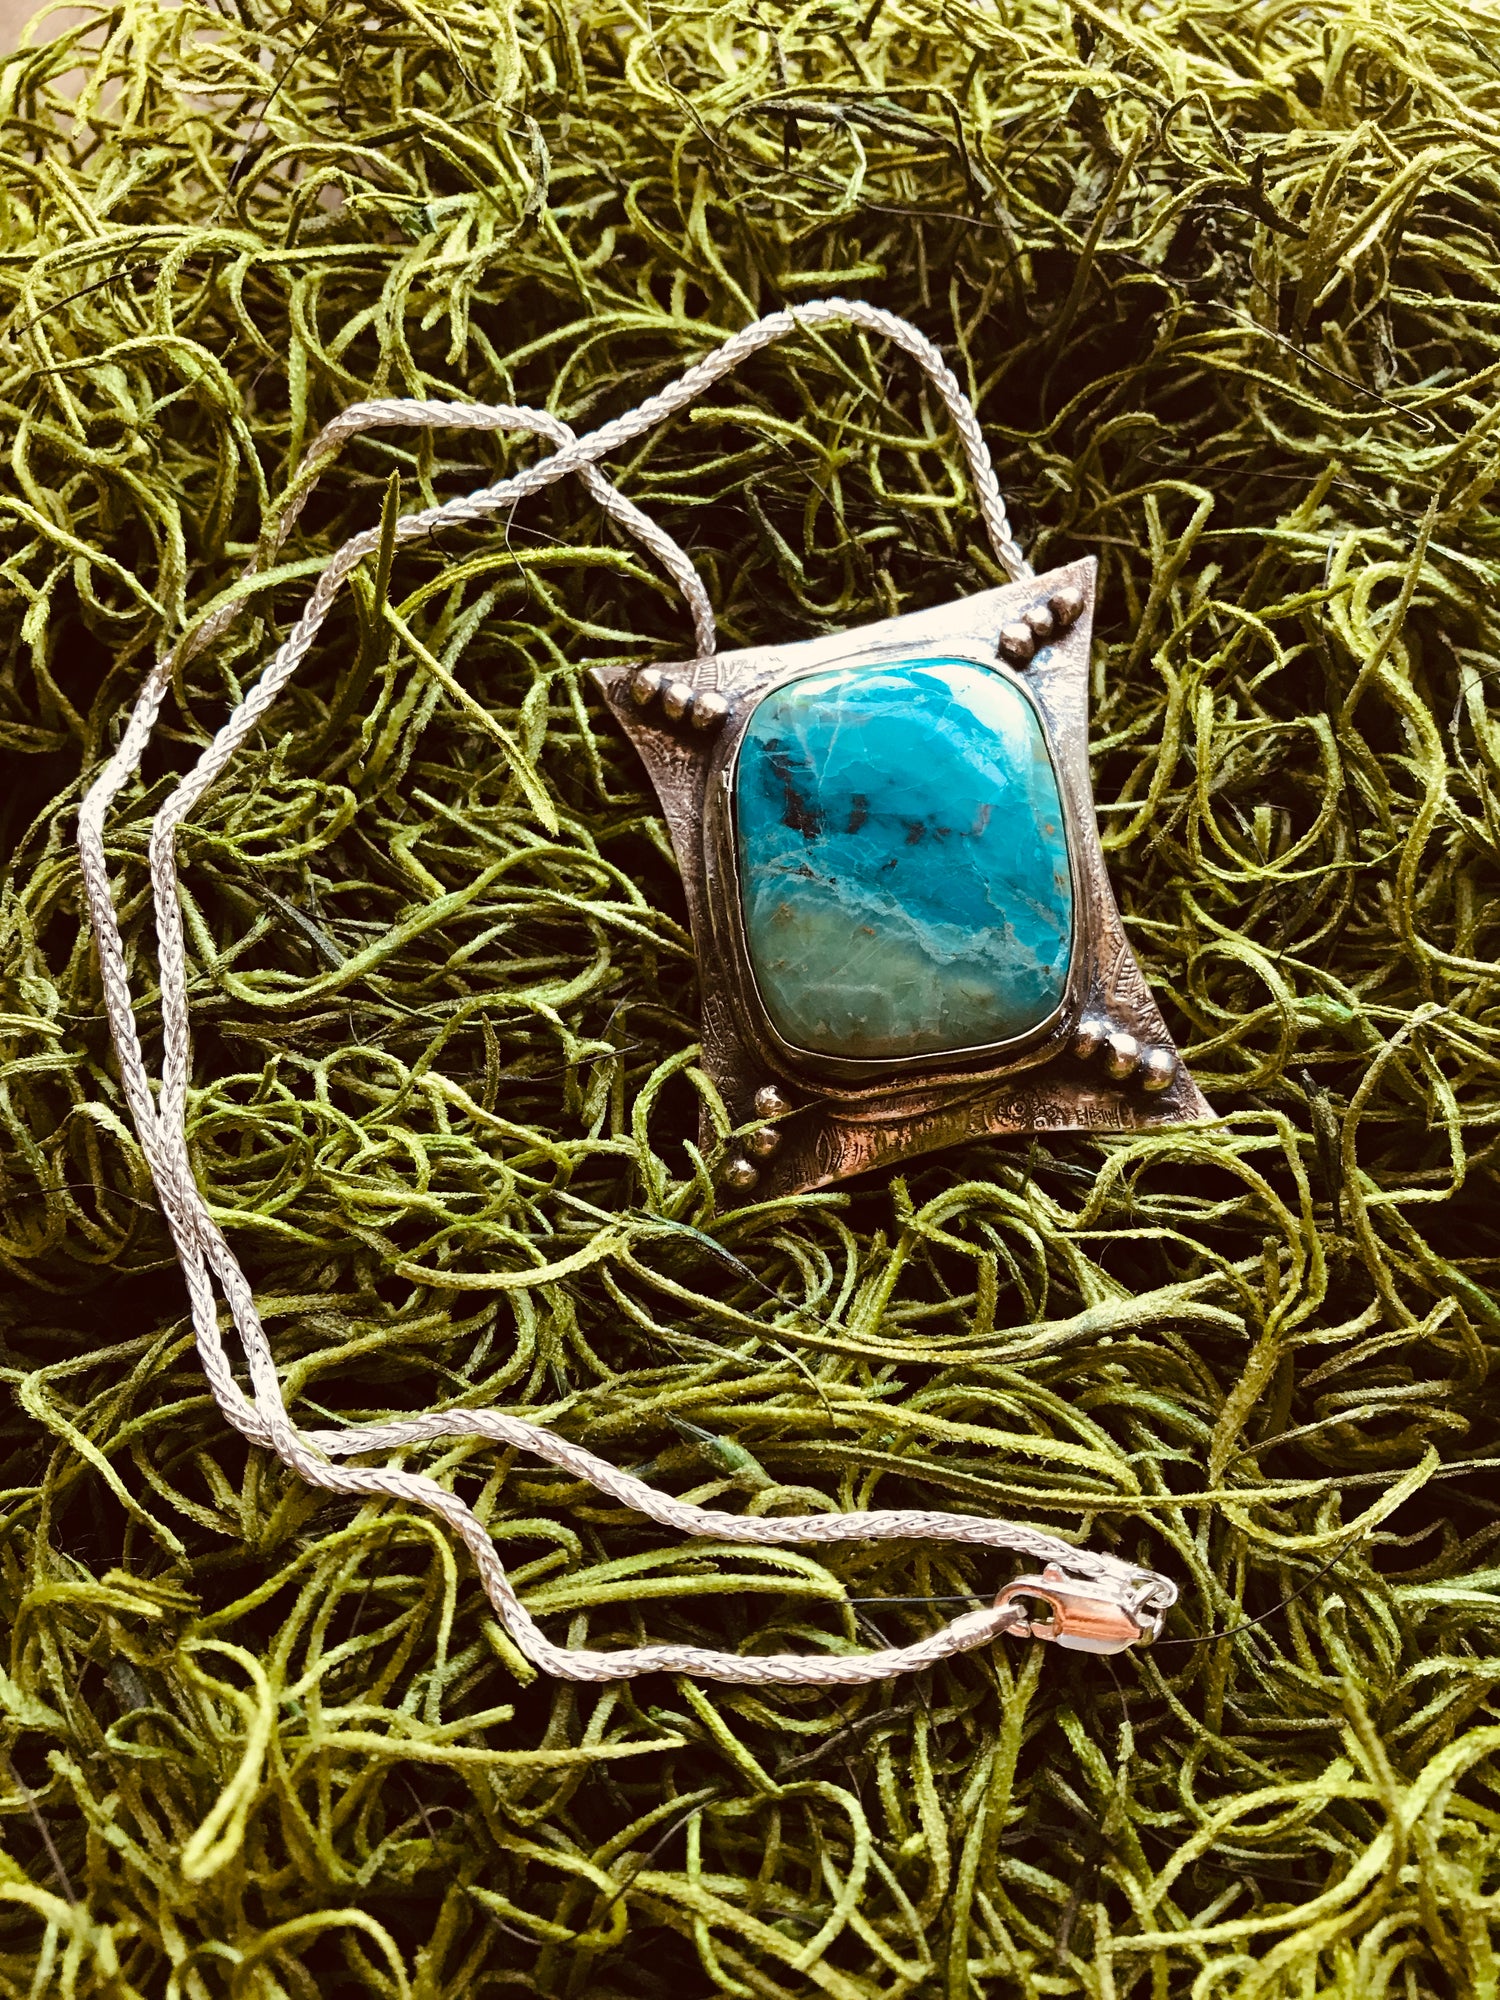 One of a kind fully handmade sterling silver art jewelry necklace with a spectacular vibrant blue green Chrysocolla (a.k.a "Peruvian Turquoise") stone. The polished sterling silver pendant was oxidized to give it an antique look. This unique creation balances from an 18-inch sterling silver 1.6mm wheat chain.